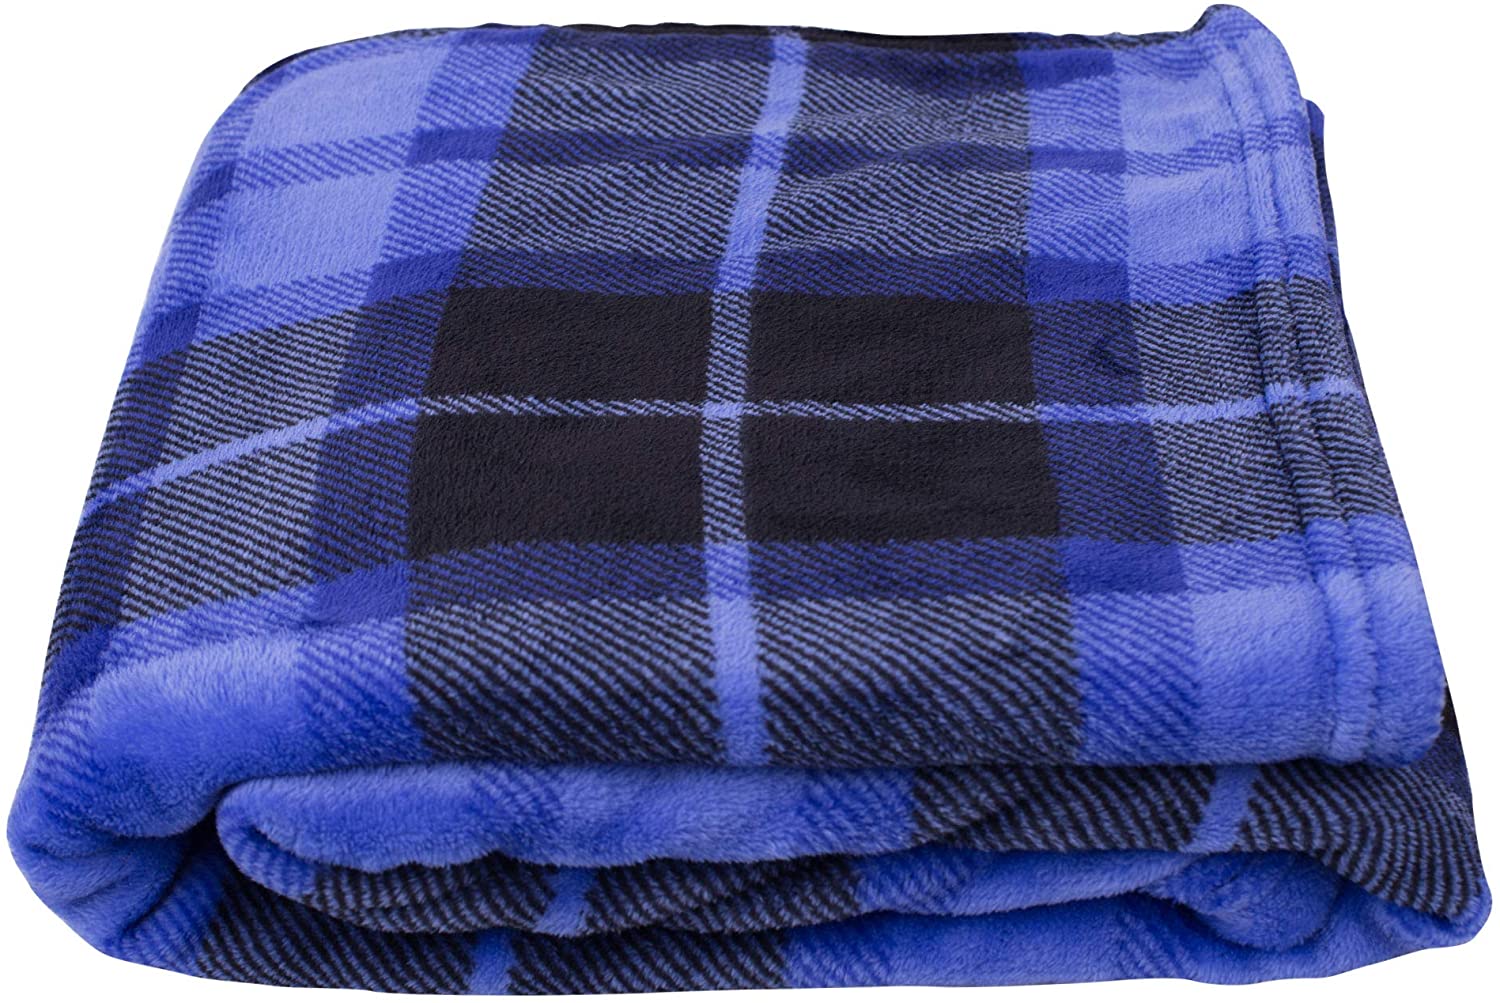 Free Sample Factory Customized Flannel Fleece Blankets For All Seasons ...